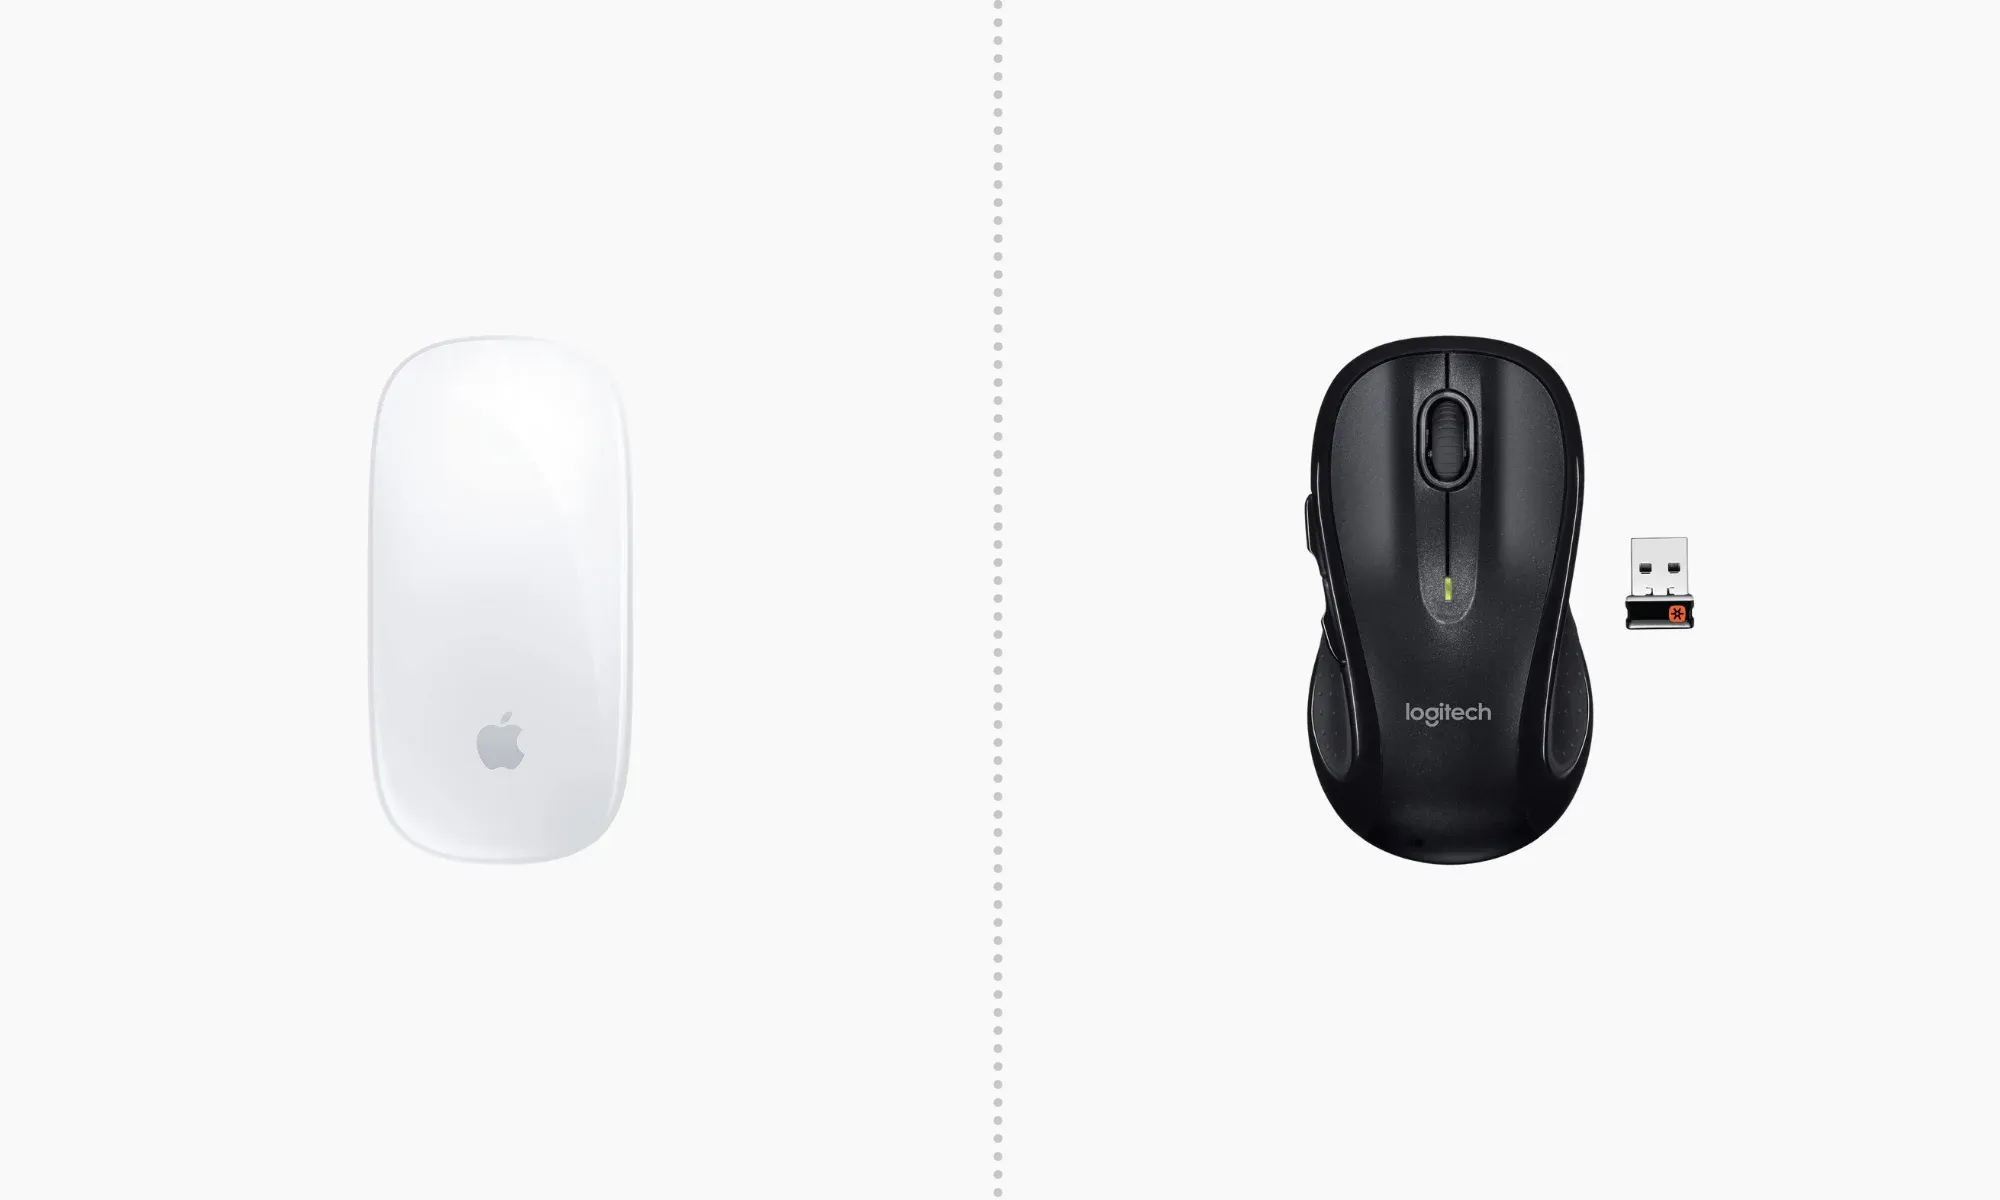 Apple Magic Mouse and Logitech M510 Wireless Computer Mouse